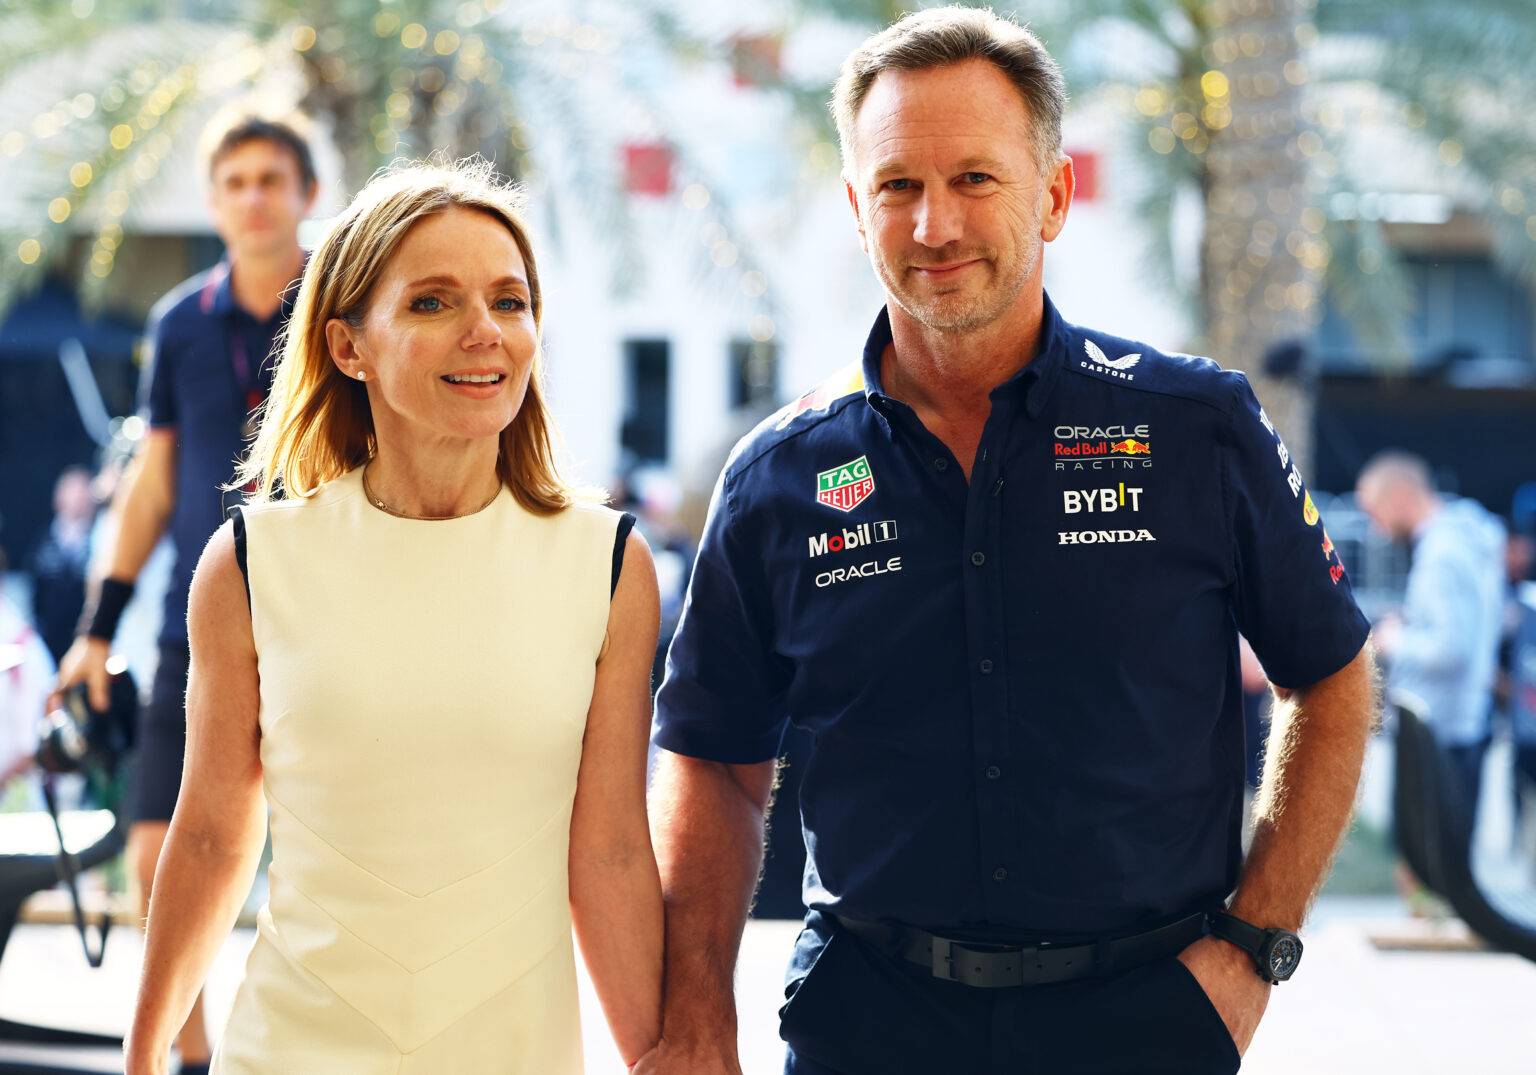 Geri Halliwell’s ‘eyes look sad’ in outing with Christian Horner after WhatsApp scandal